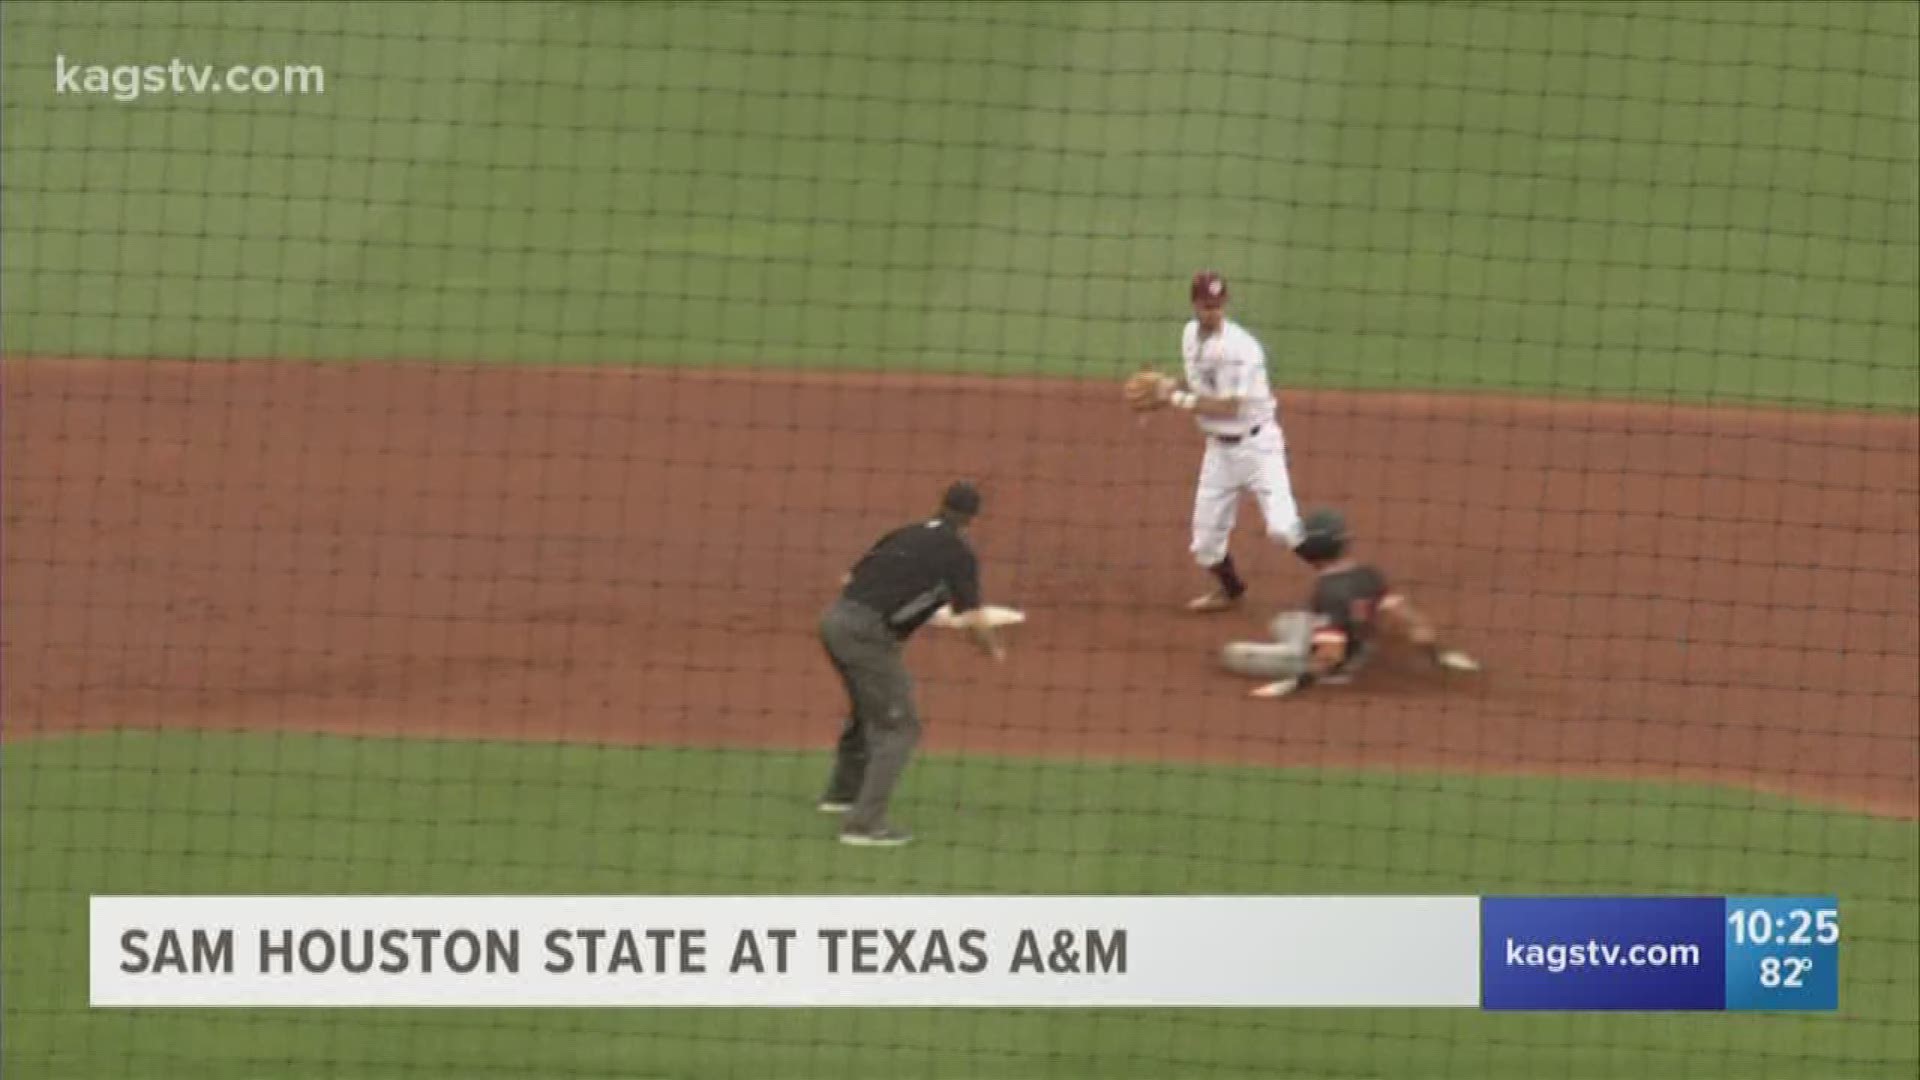 Aggies end losing streak with 6-5 win over Bearkats.